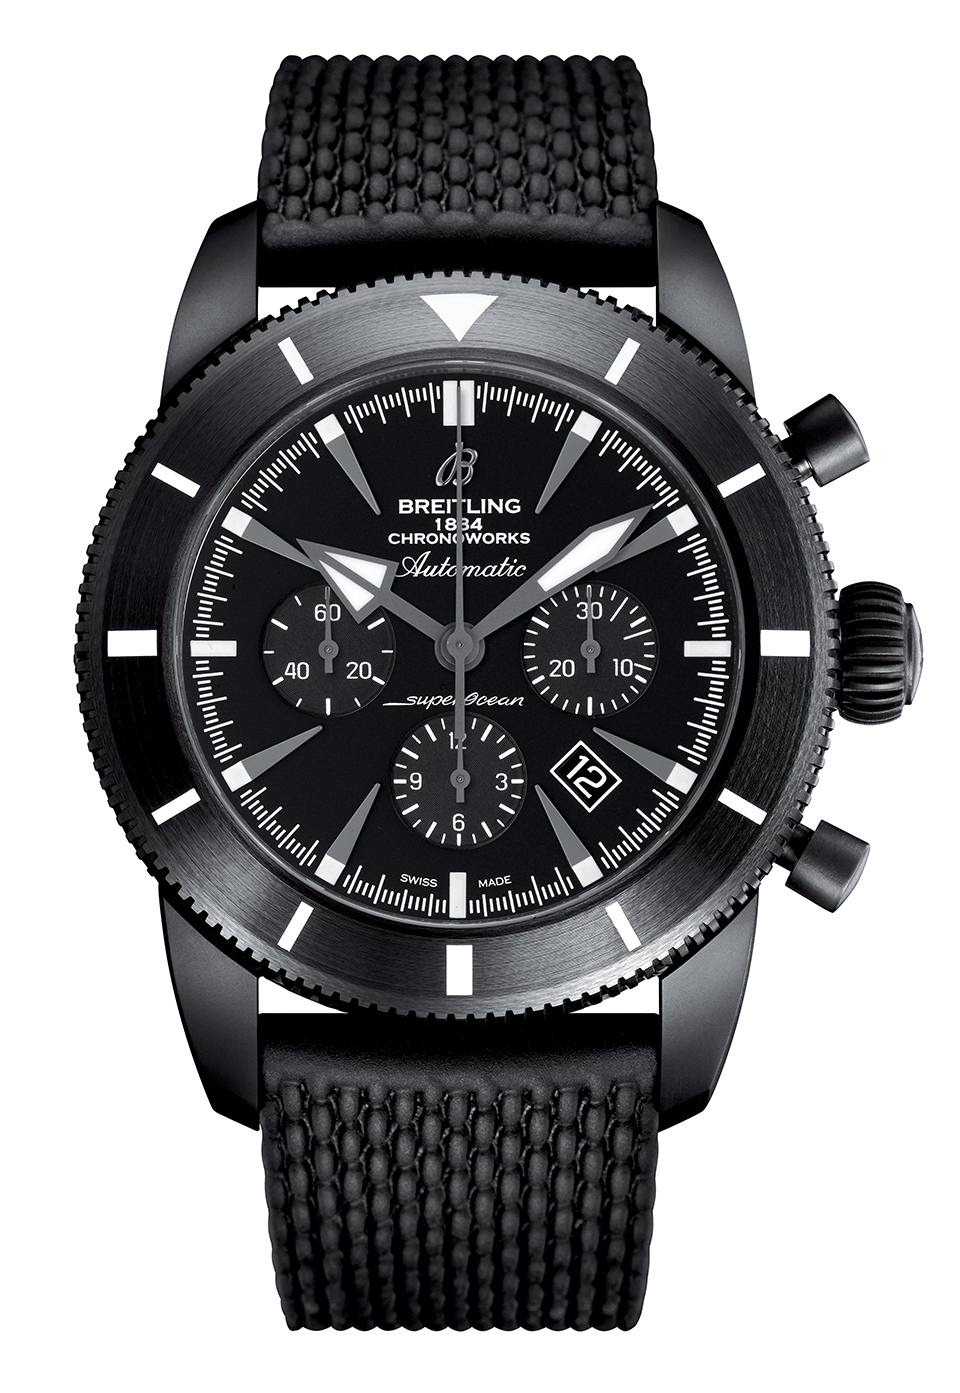 This black dial replica Breitling watch just gives people a cool feeling, with powerful and beautiful performance, also with the high-tech ceramic and upgrading, this one can be said as a worthy buying watch.